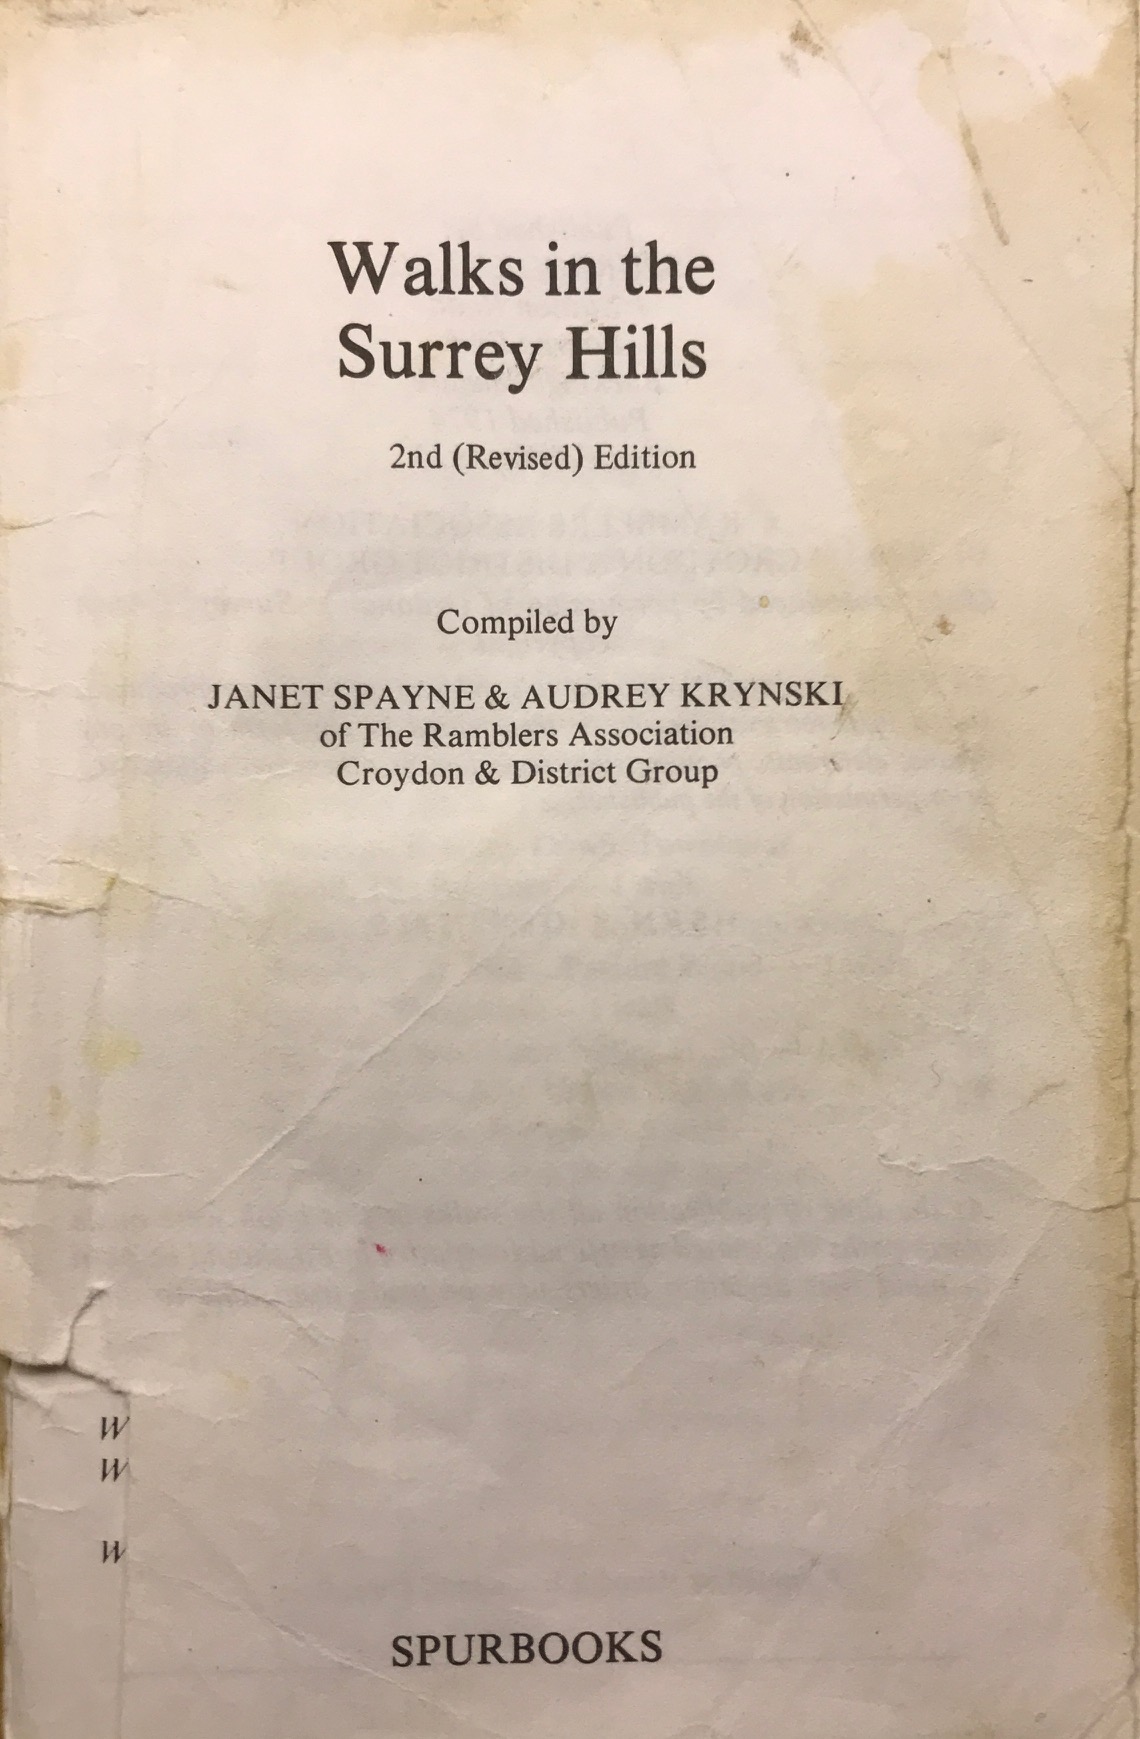 Wintershall Manor: “Walks in the Surrey Hills”. Published 1974.